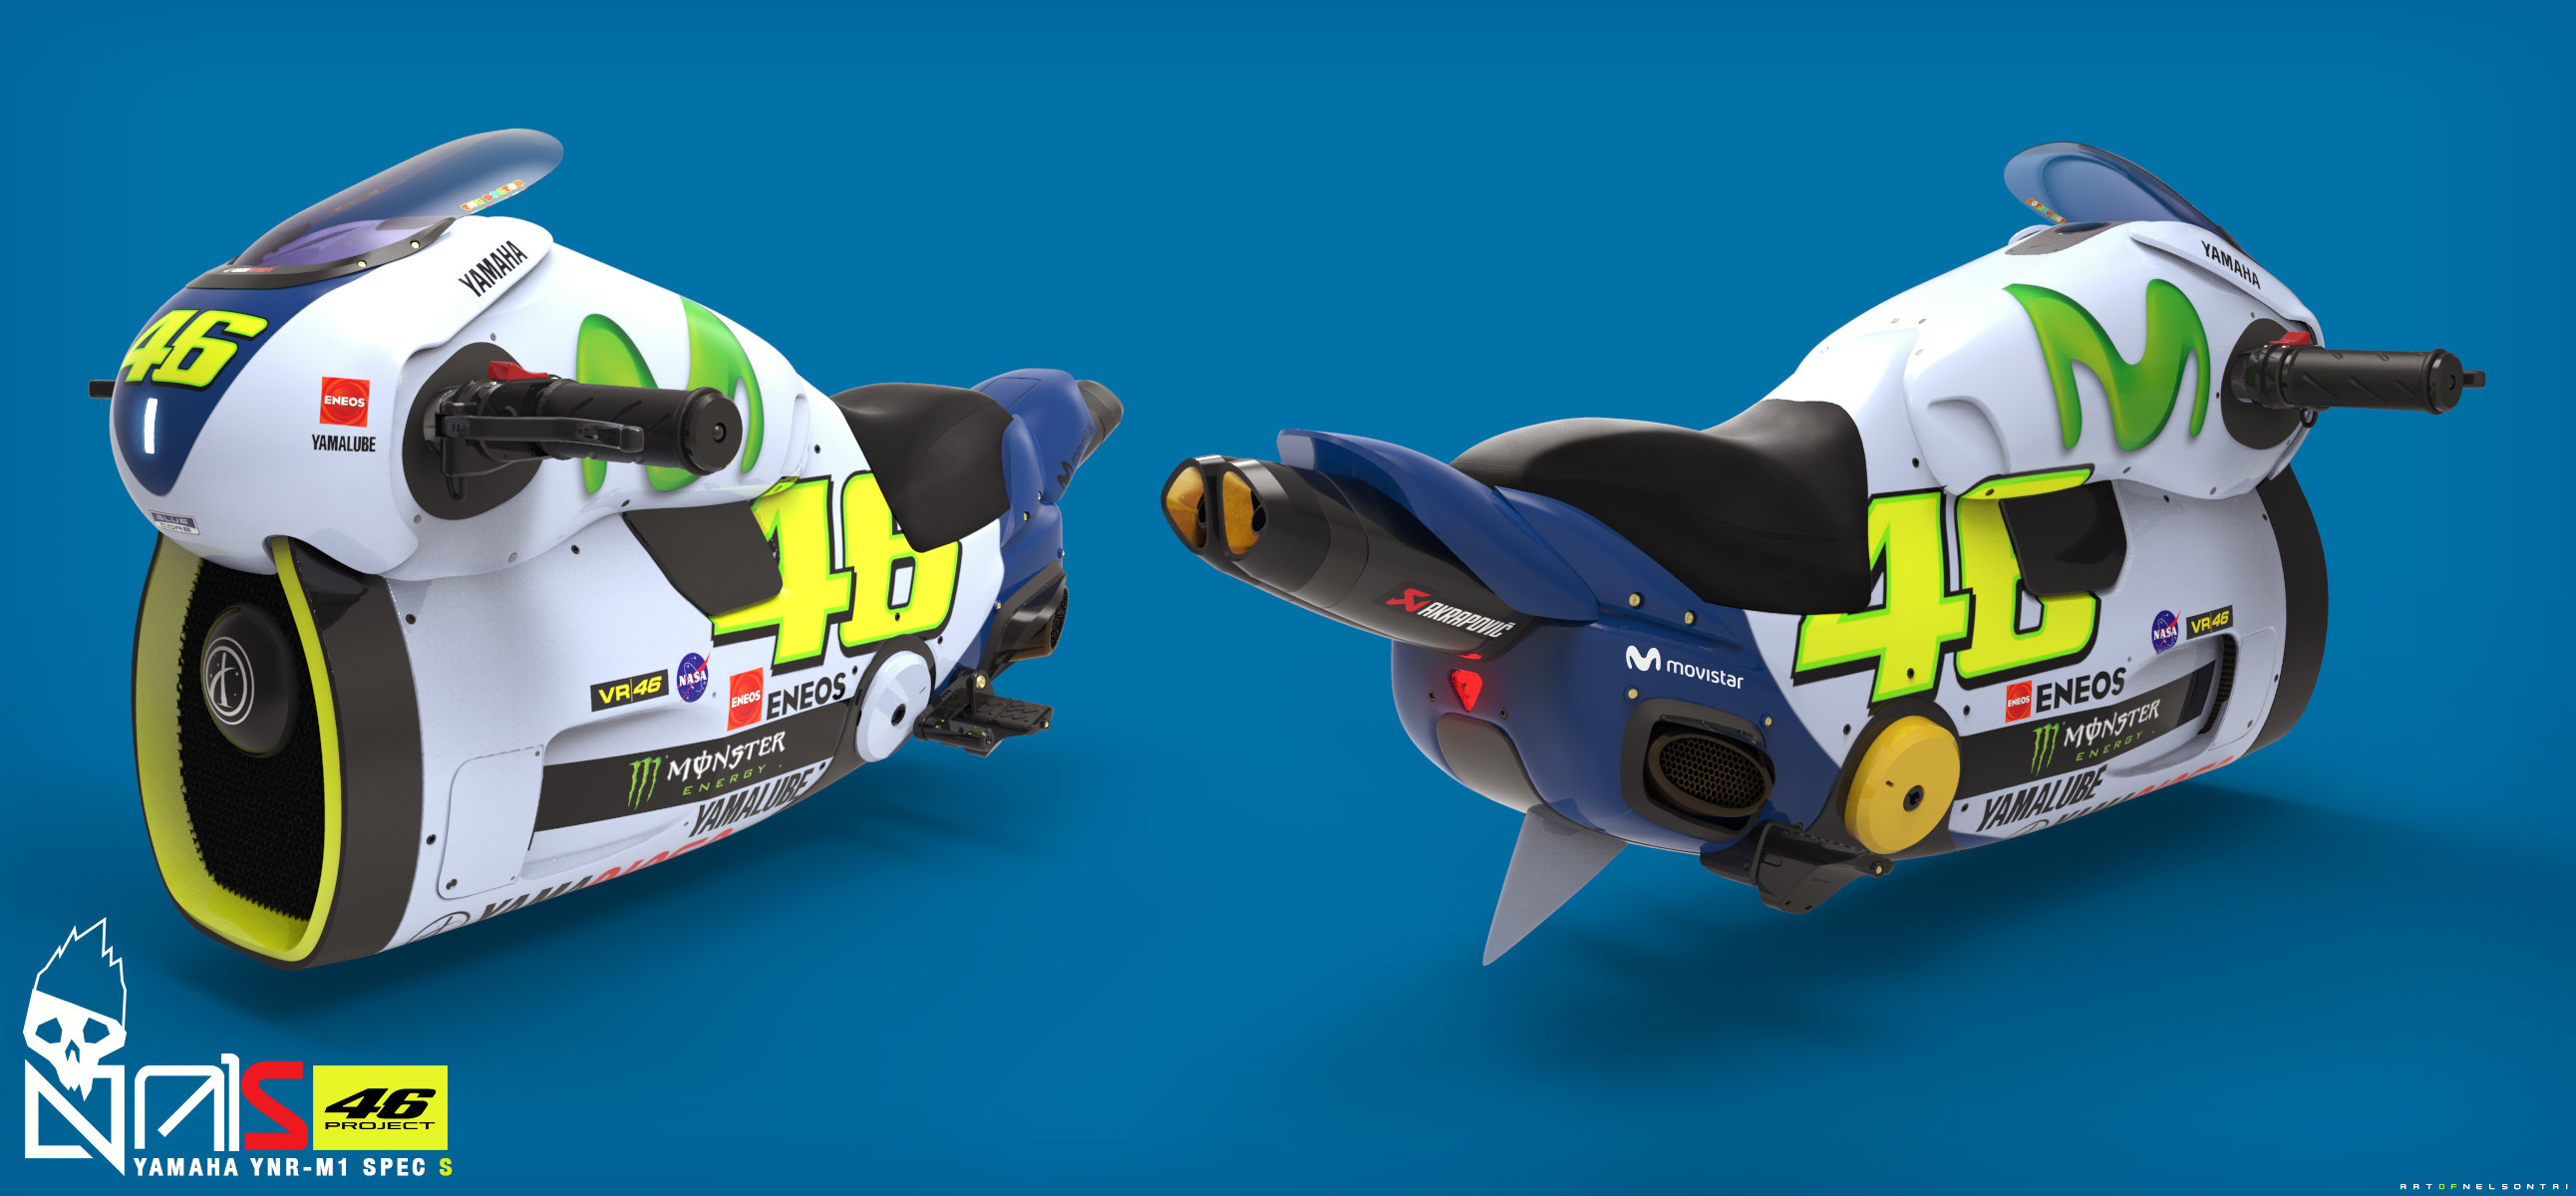 VR46 Hoverbike